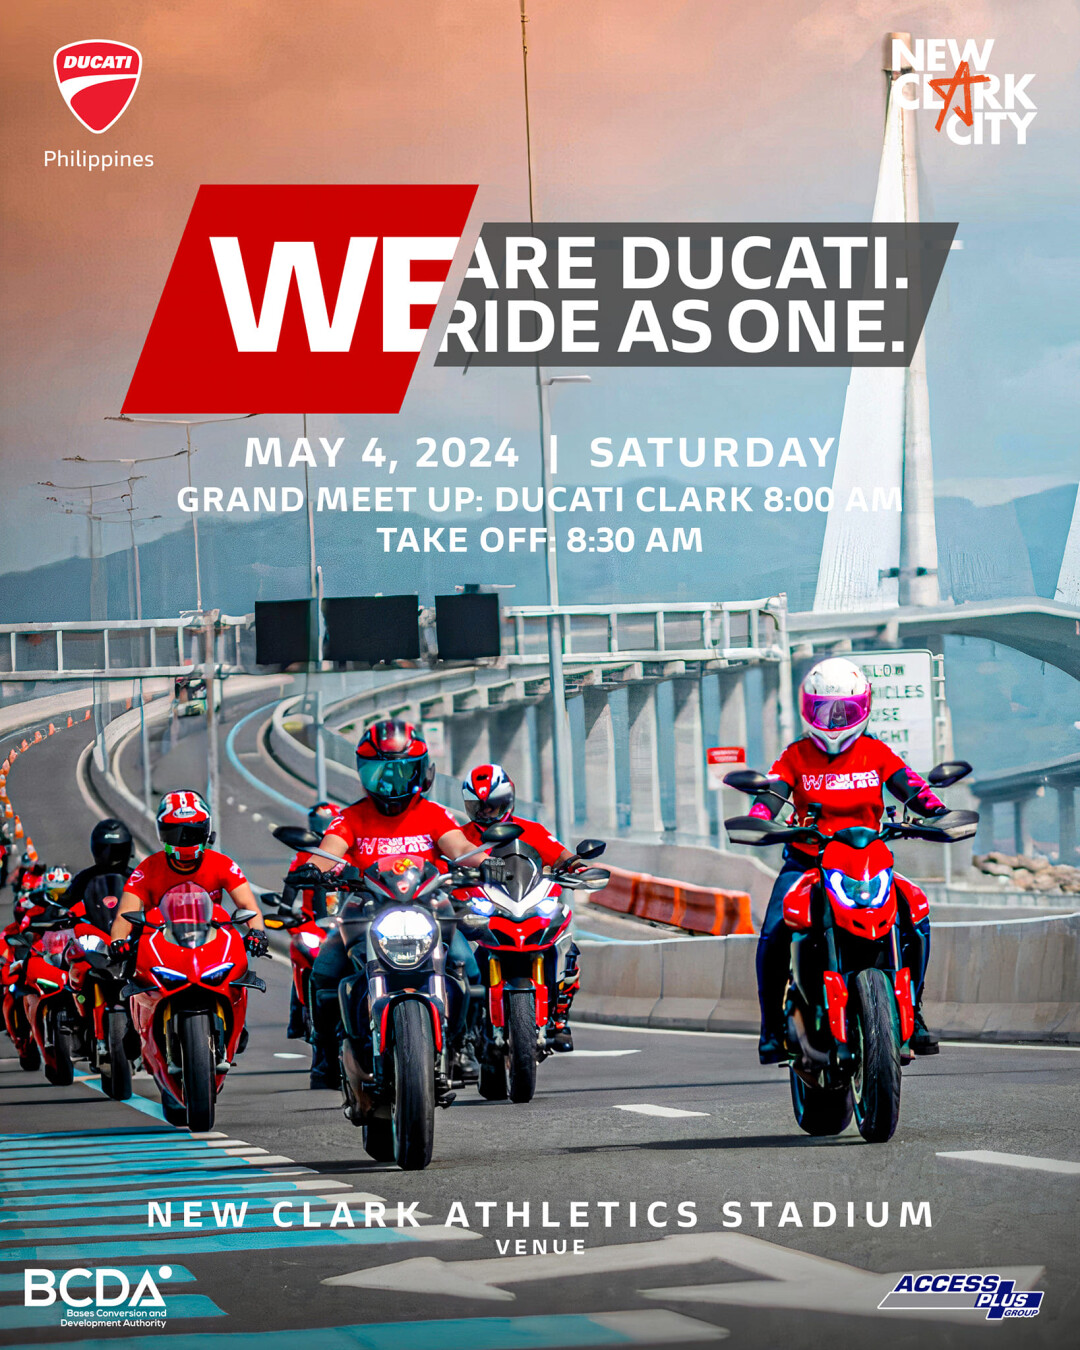 WE ARE DUCATI. WE RIDE AS ONE.